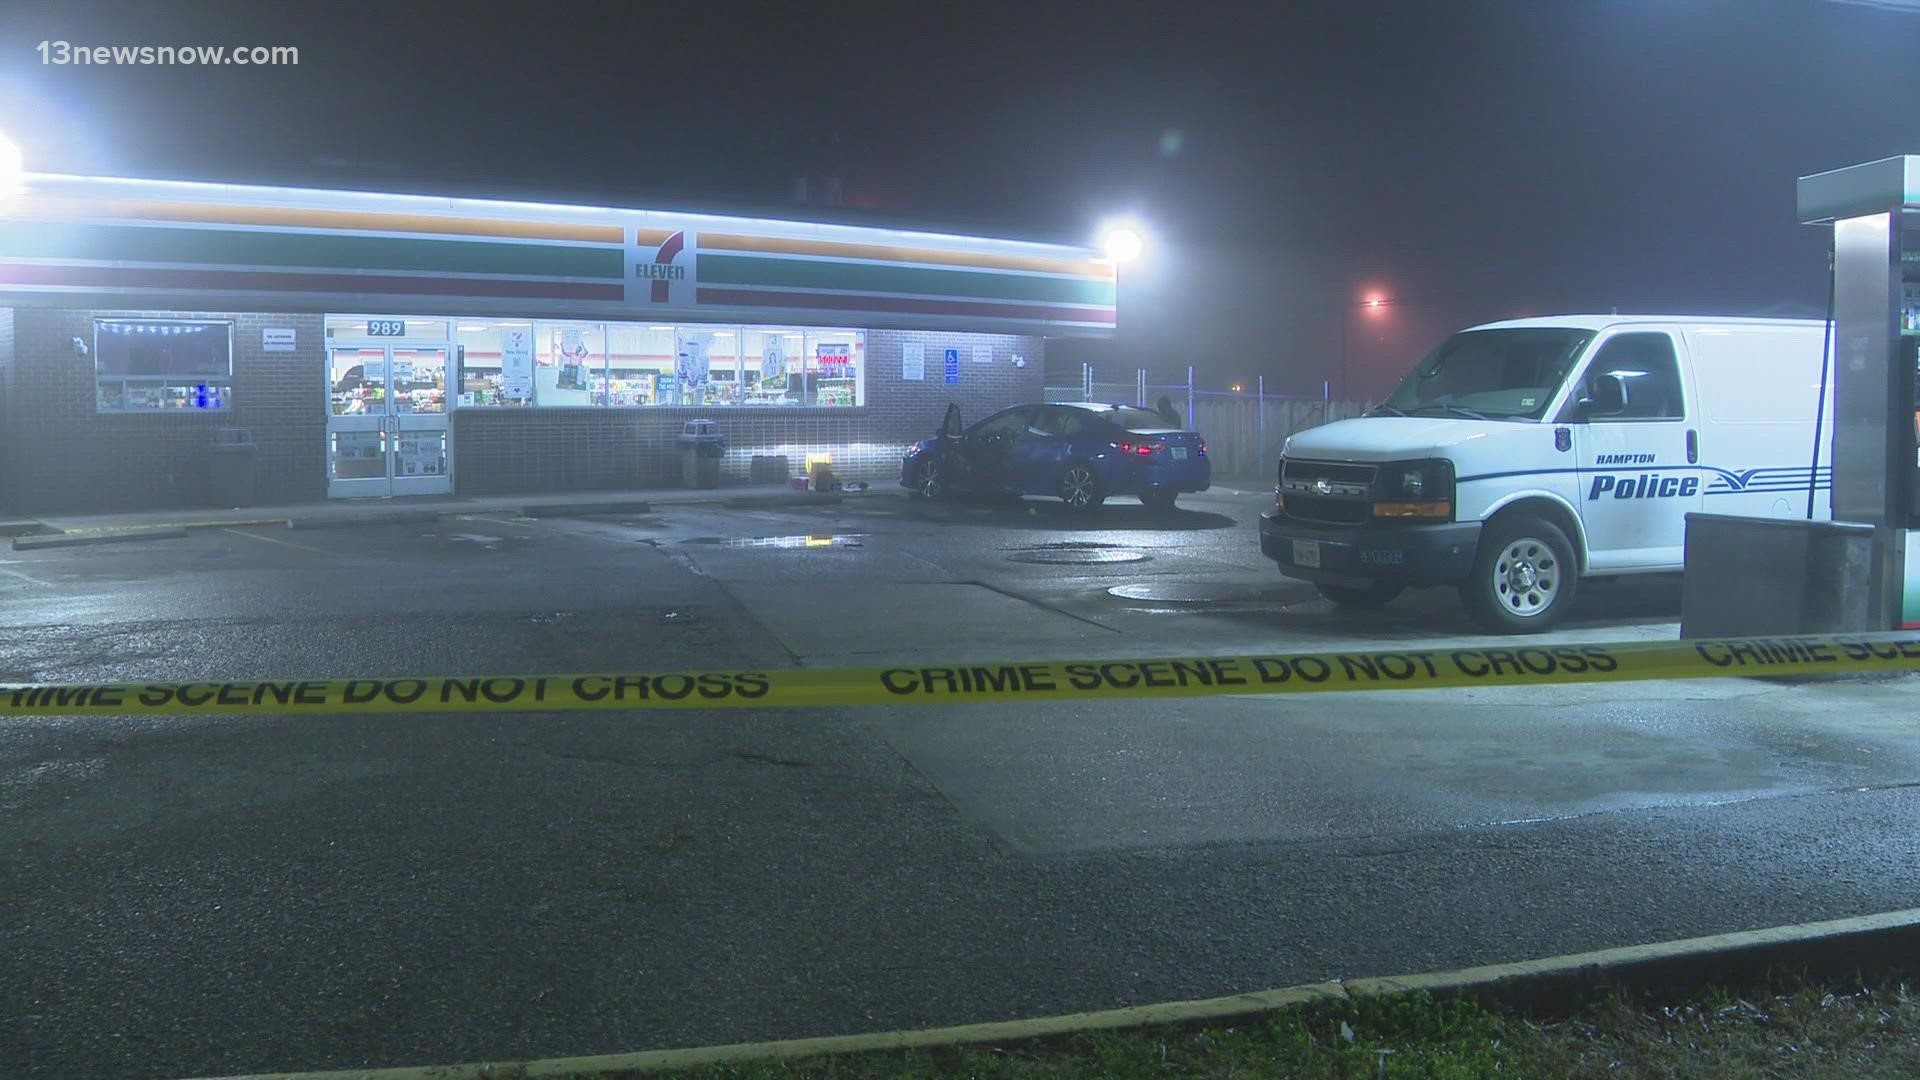 The Hampton Police Division said a man was seriously injured after being shot on King Street late Thursday night.